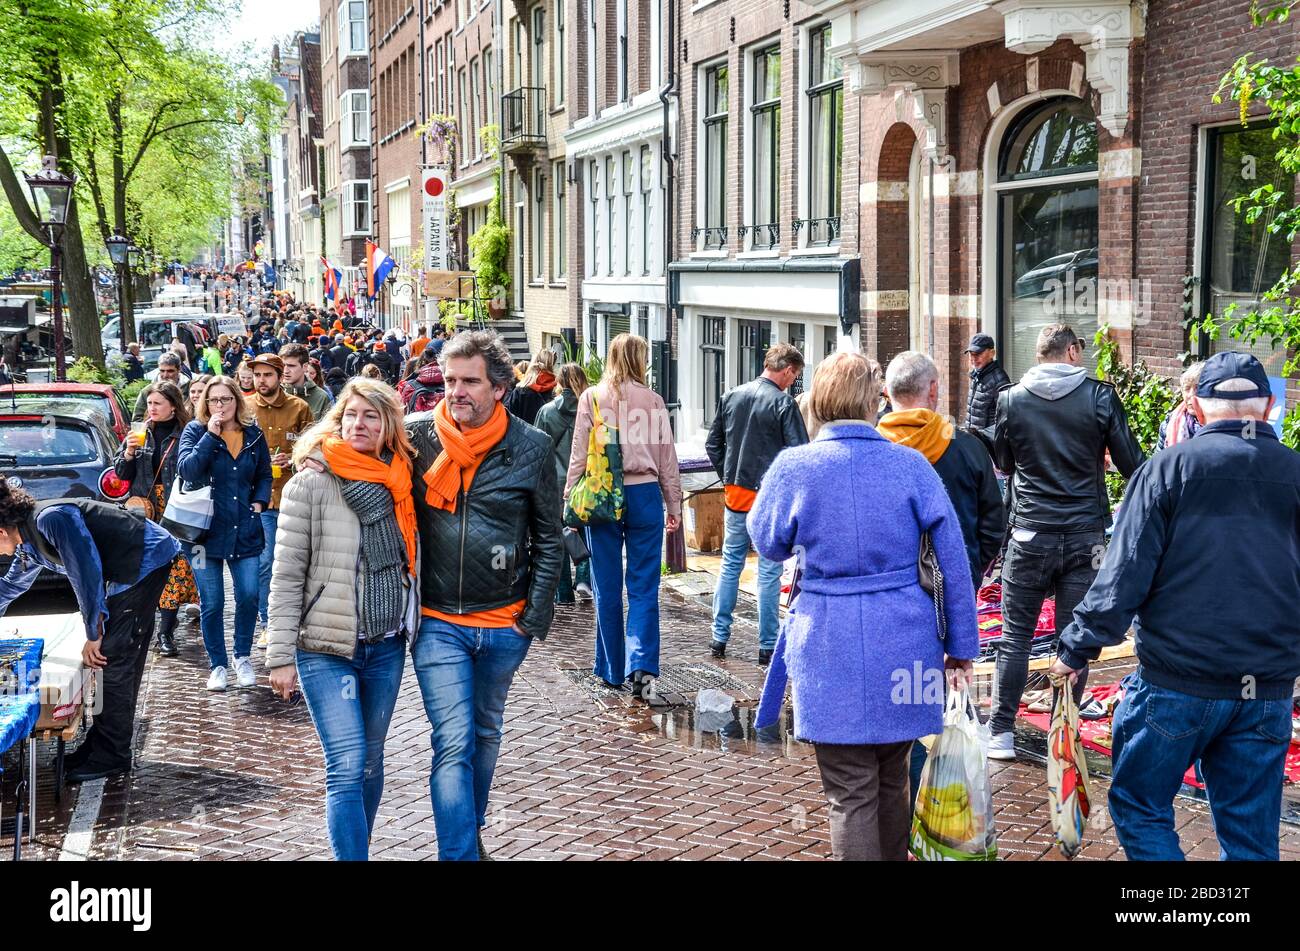 Amsterdam, Netherlands - April 27, 2019: People on the street wearing orange accessories celebrating the Kings day, Koningsdag, the birthday of the Dutch King Willem-Alexander. Overcrowded streets. Stock Photo